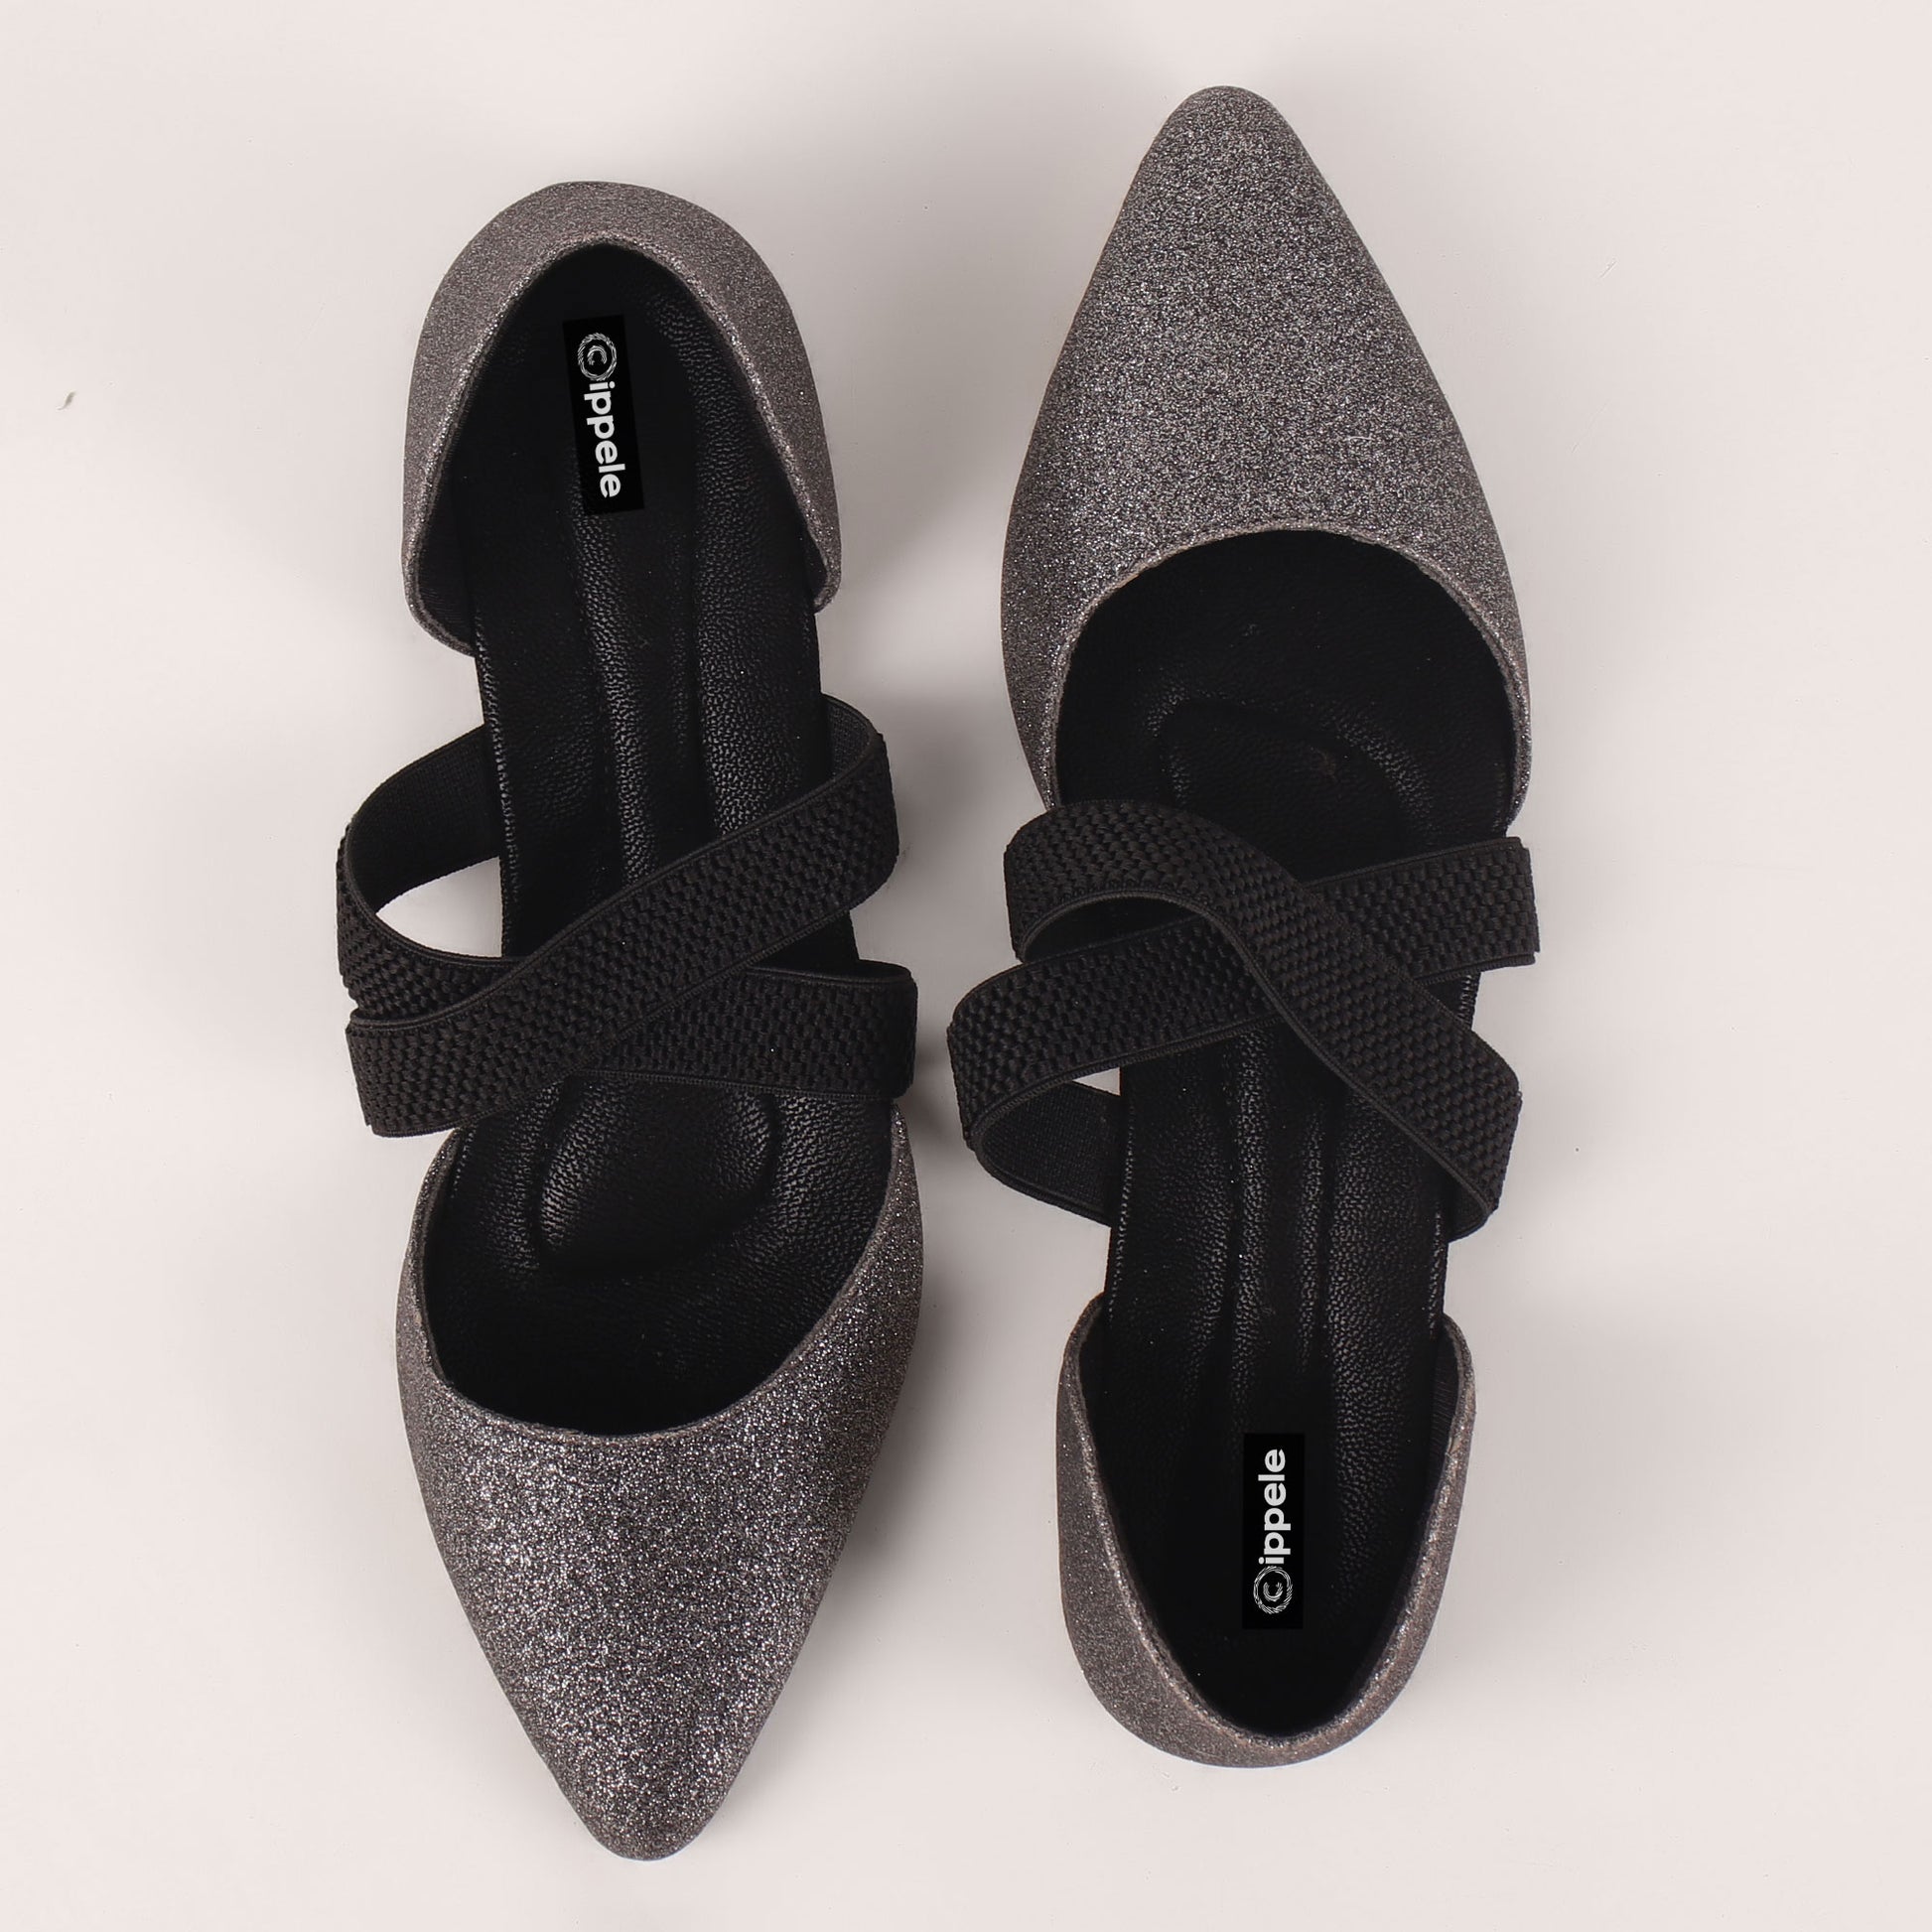 Foot Wear,Keep me Close Grey Flats - Cippele Multi Store